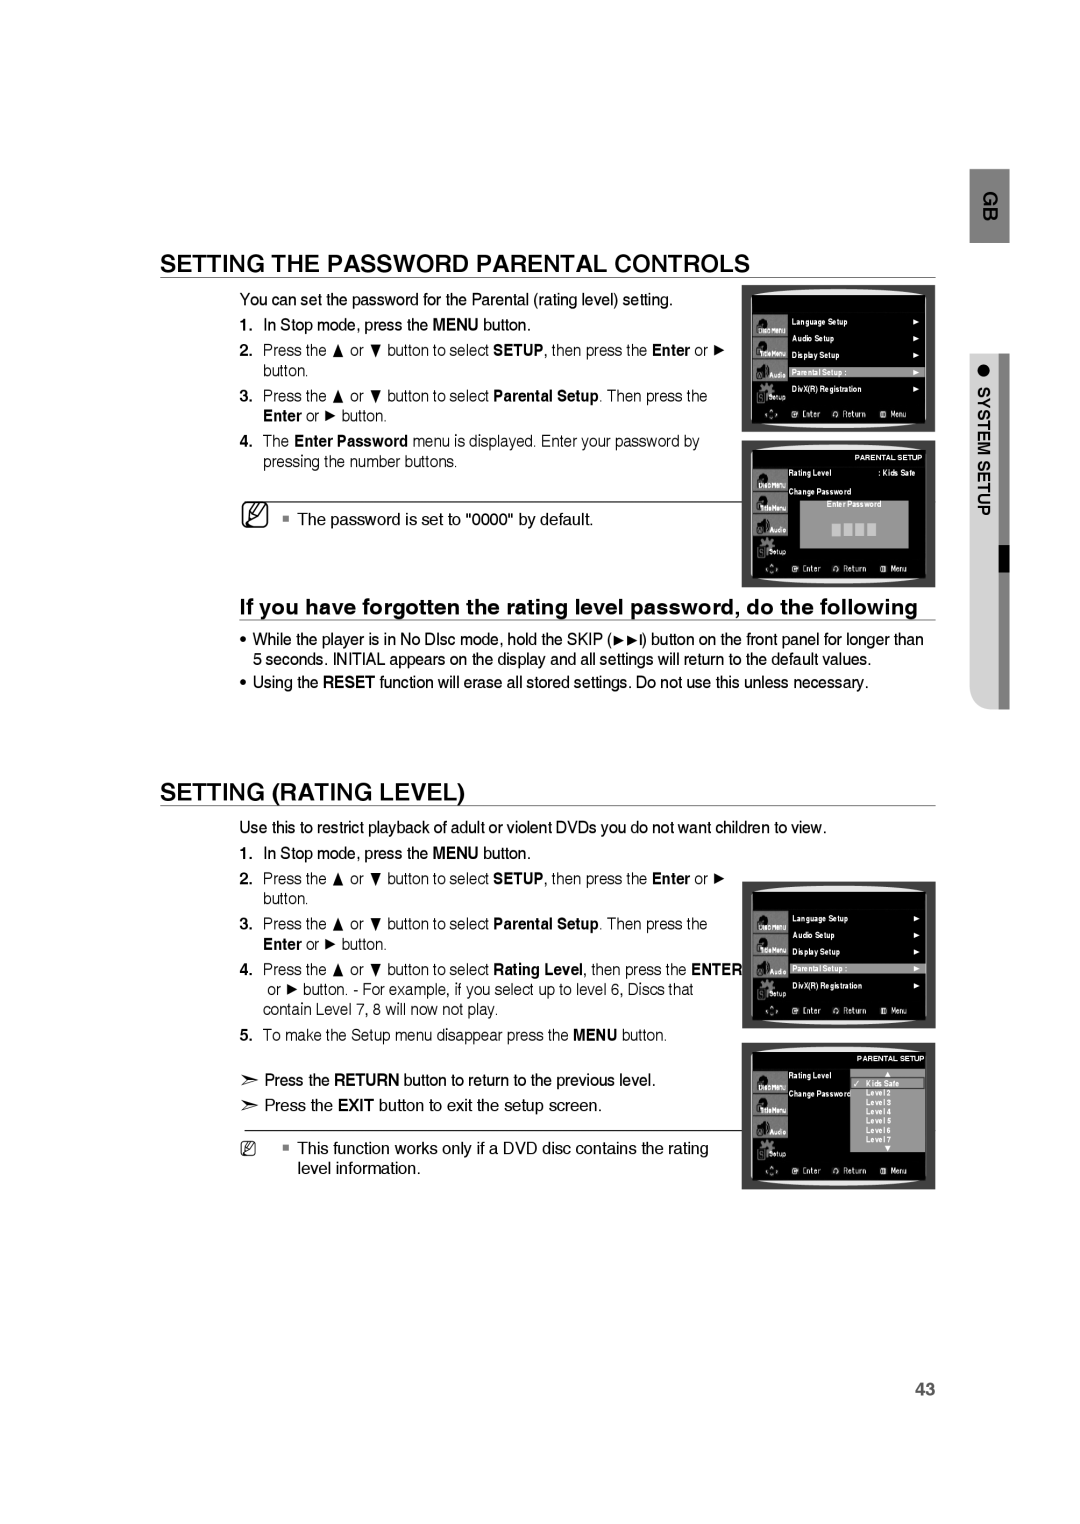 Samsung HE10T user manual Setting The Password Parental Controls, Setting Rating Level, System Setup, level information 